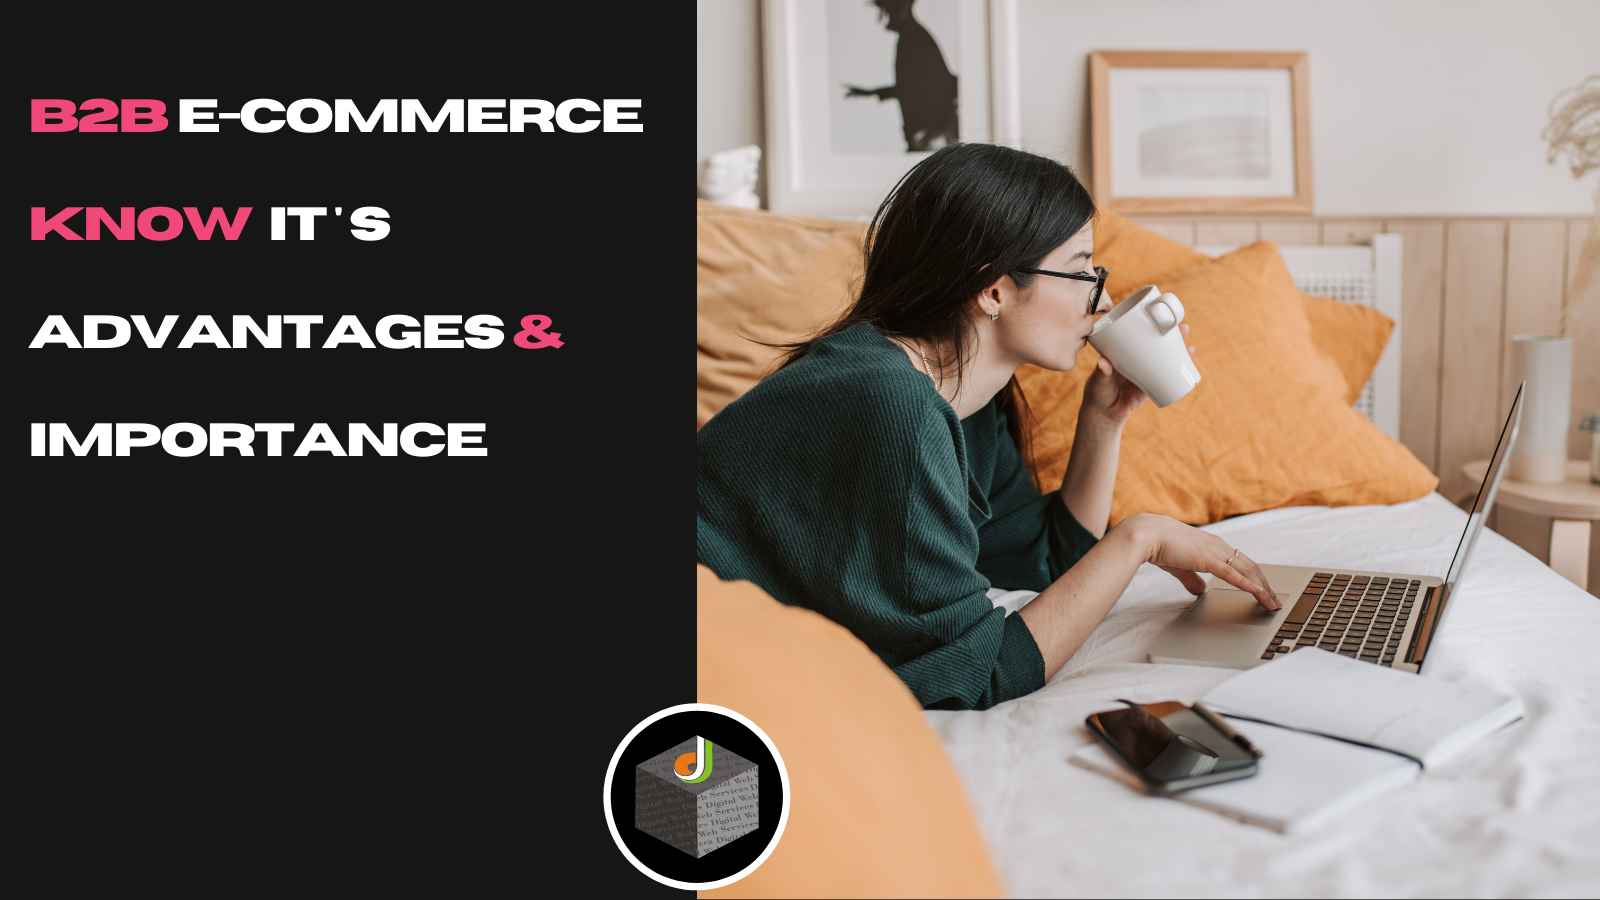 Business-to-Business E-commerce